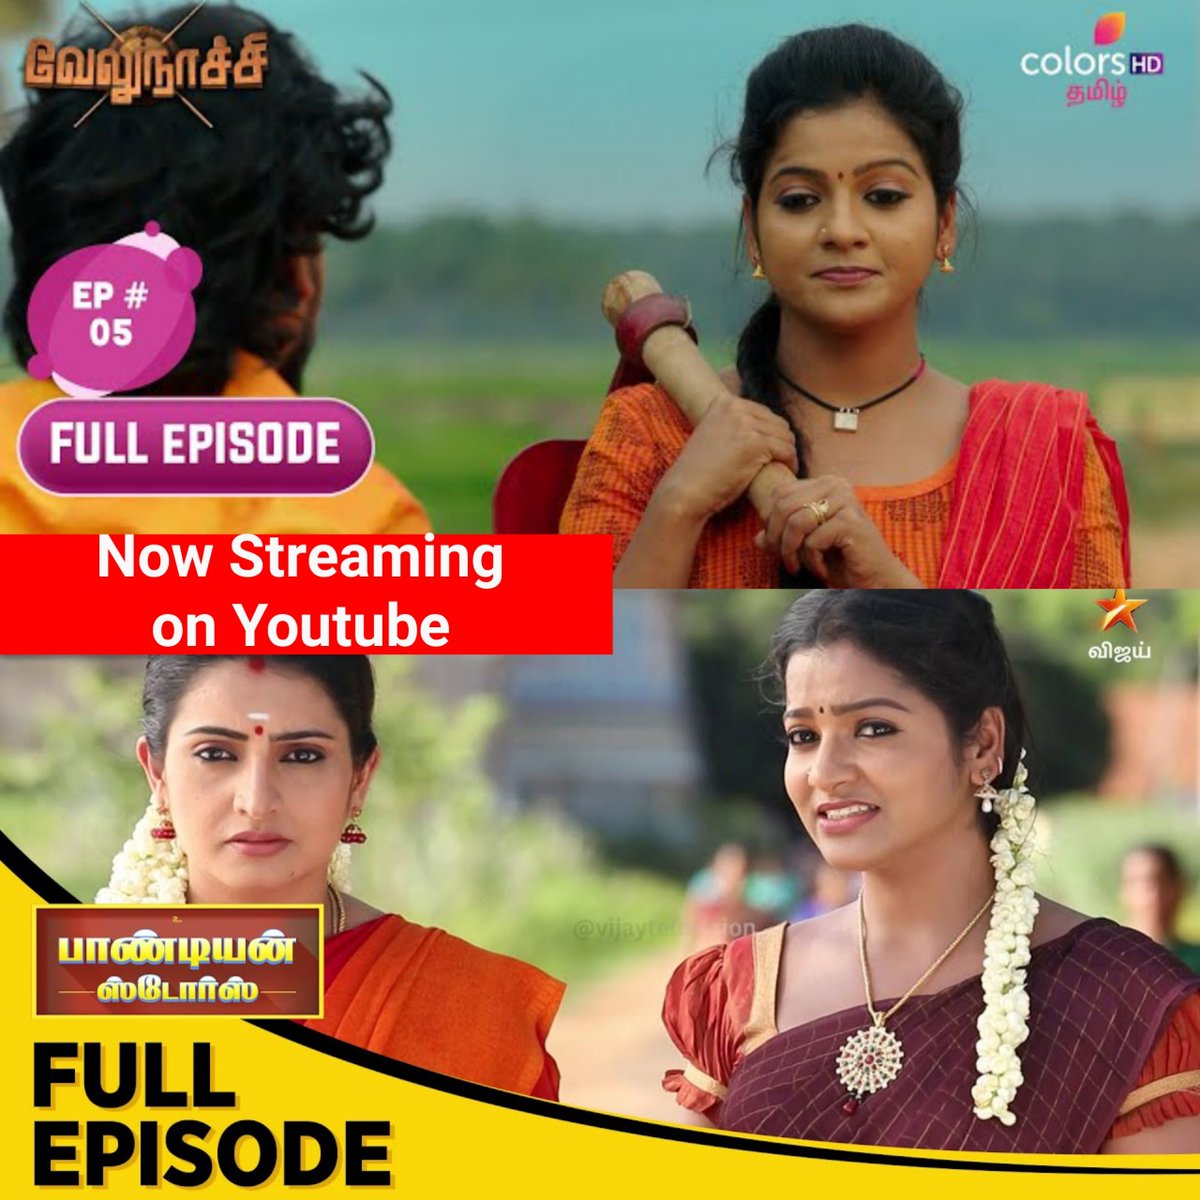 Actress #VJChithra 's Two Tamil serials streaming now on Youtube

#Velunachi @colorstvtamil 

#PandianStores @vijaytelevision 

#ChithuVJ #Mullai #VijayTelevision #ColorsTamil #TamilSerials #ColorsTamilSerials #VijayTvSerials #TvSerials #cinemaupdate